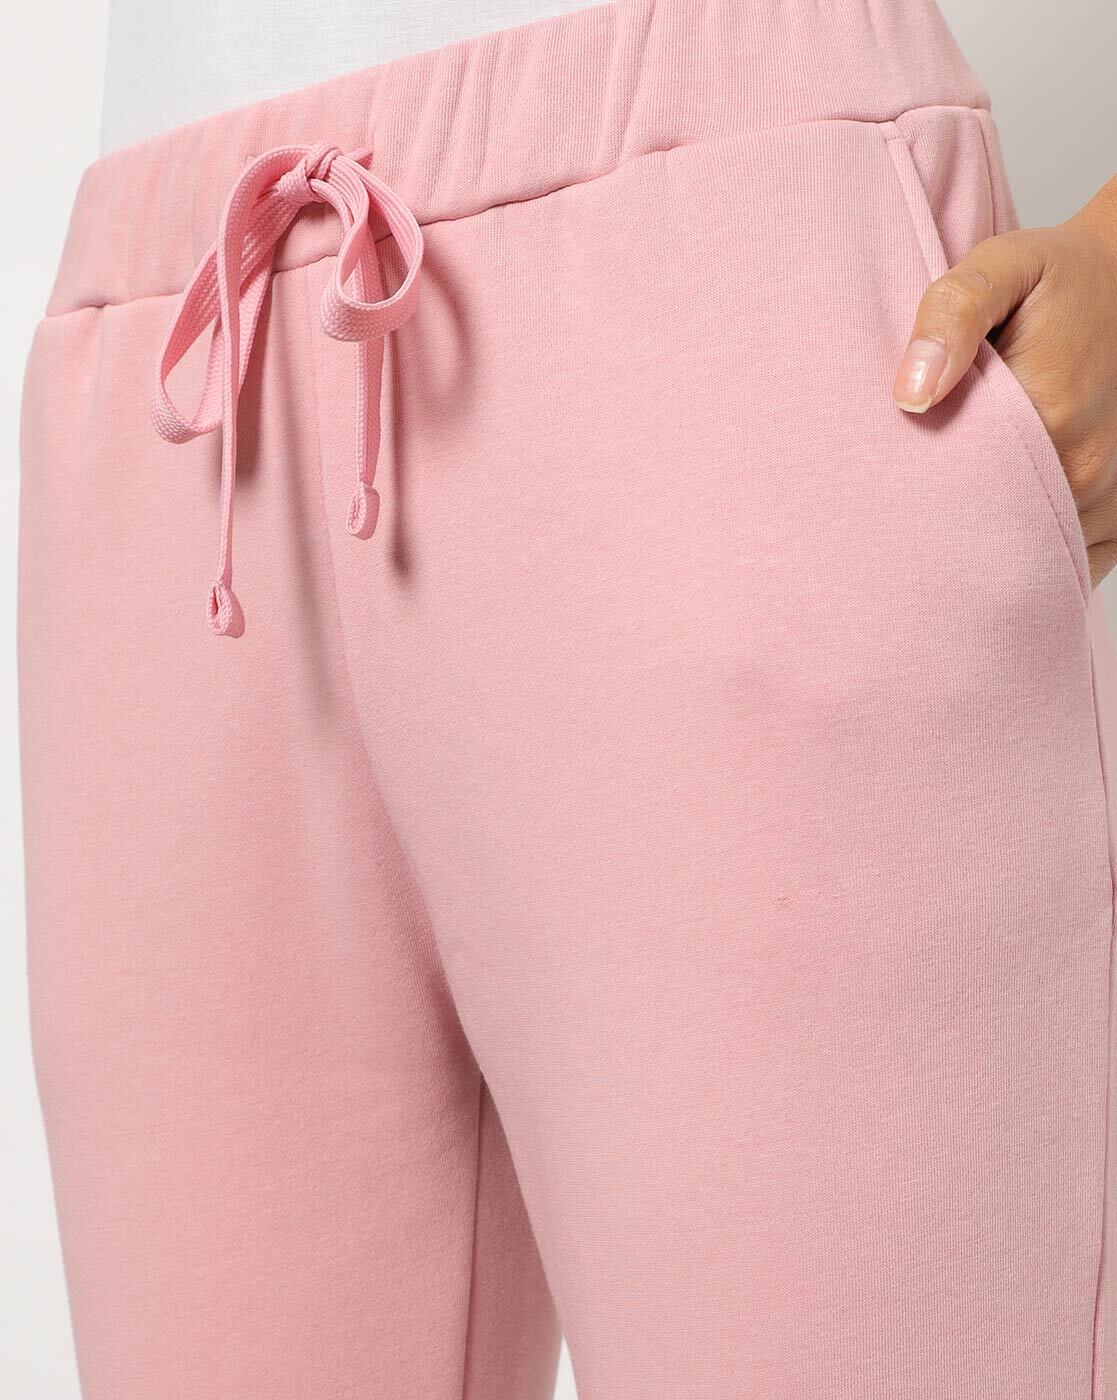 Prarthana Recommends : Women Joggers with Insert Pockets